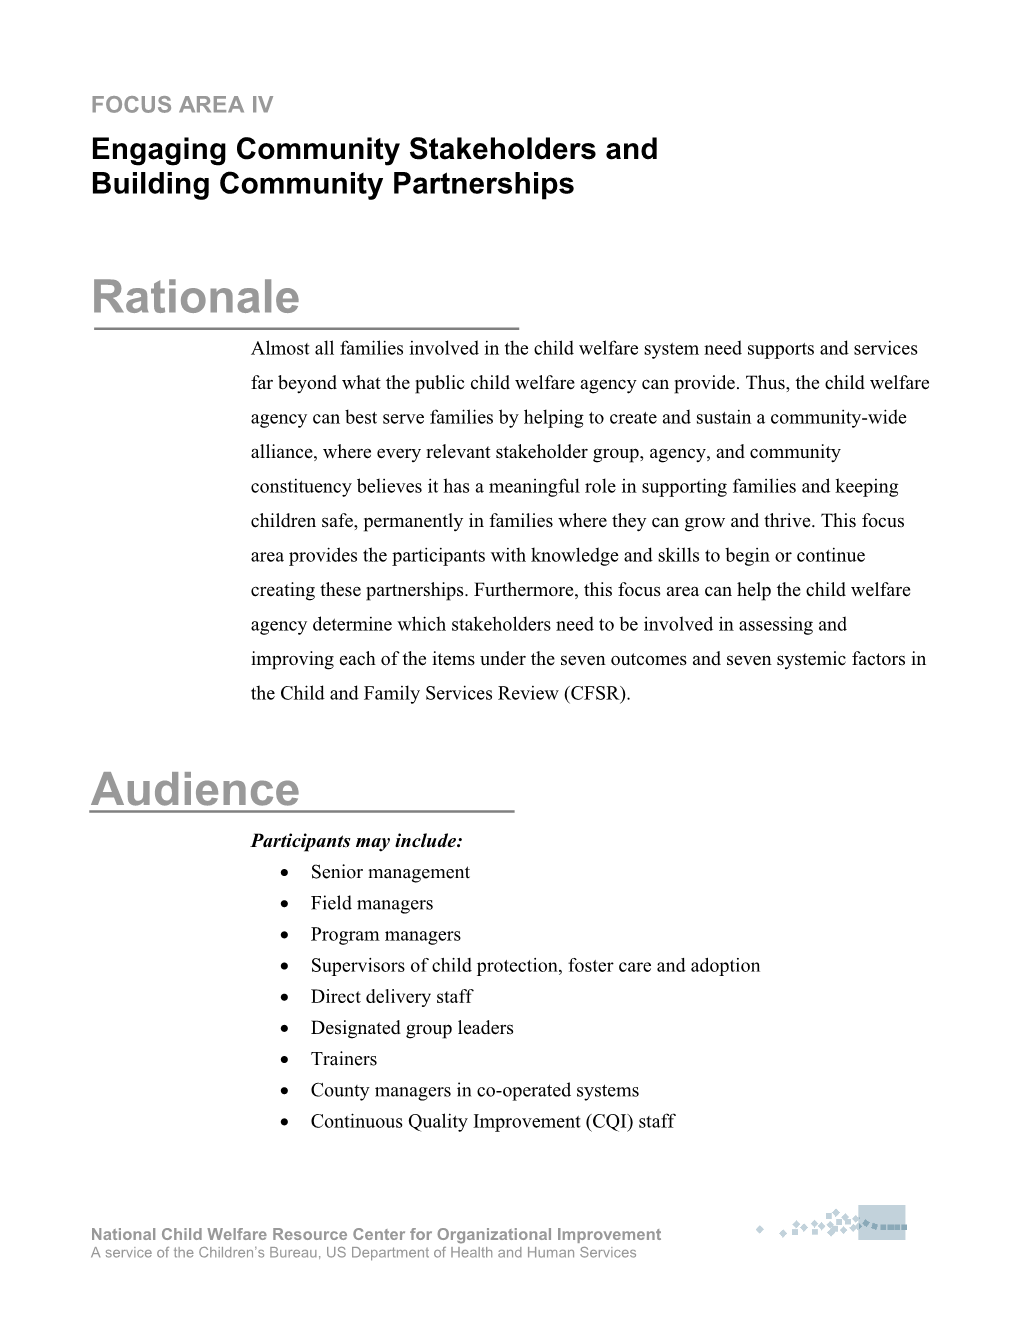 Module Iv: Engaging Community Stakeholders and Building Community Partnerships